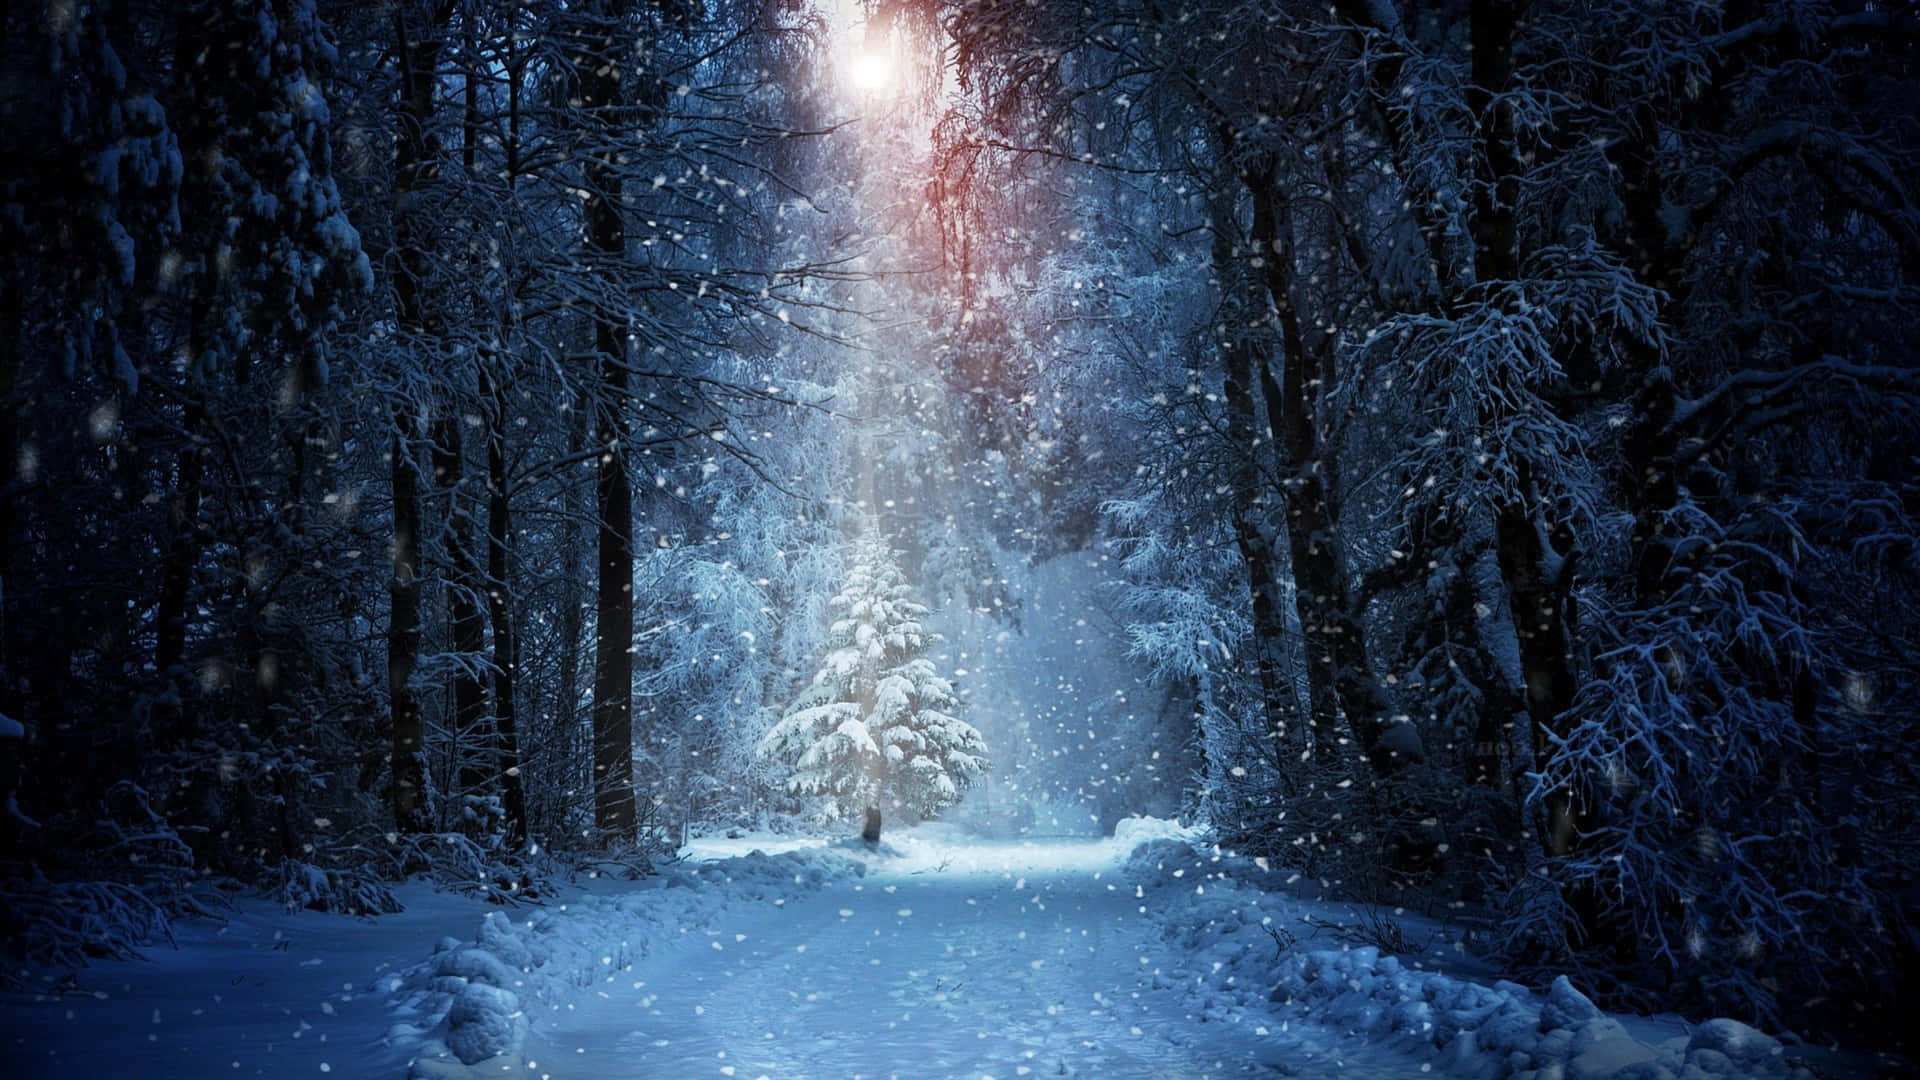 a snowy path with a light shining through it